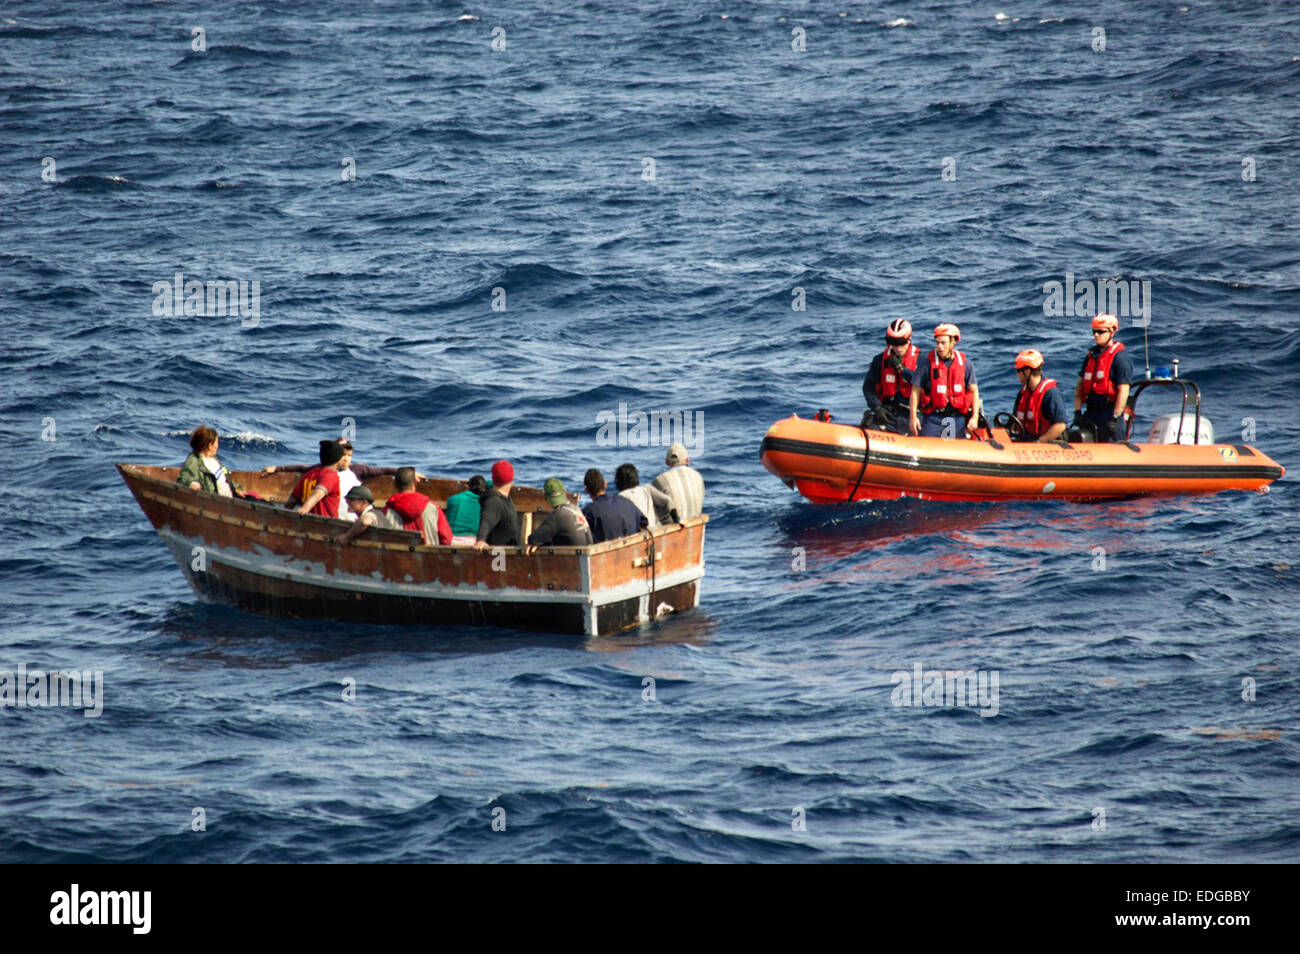 Members of the US Coast Guard Cutter Knight Island approach a boat with 12 Cuban migrants December 30, 2014 southwest of Key West, Florida. The U.S. Coast Guard reports that the number of Cubans picked up at sea trying to reach the United States has surged since President Barack Obama announced plans to restore diplomatic relations with Havana. Stock Photo